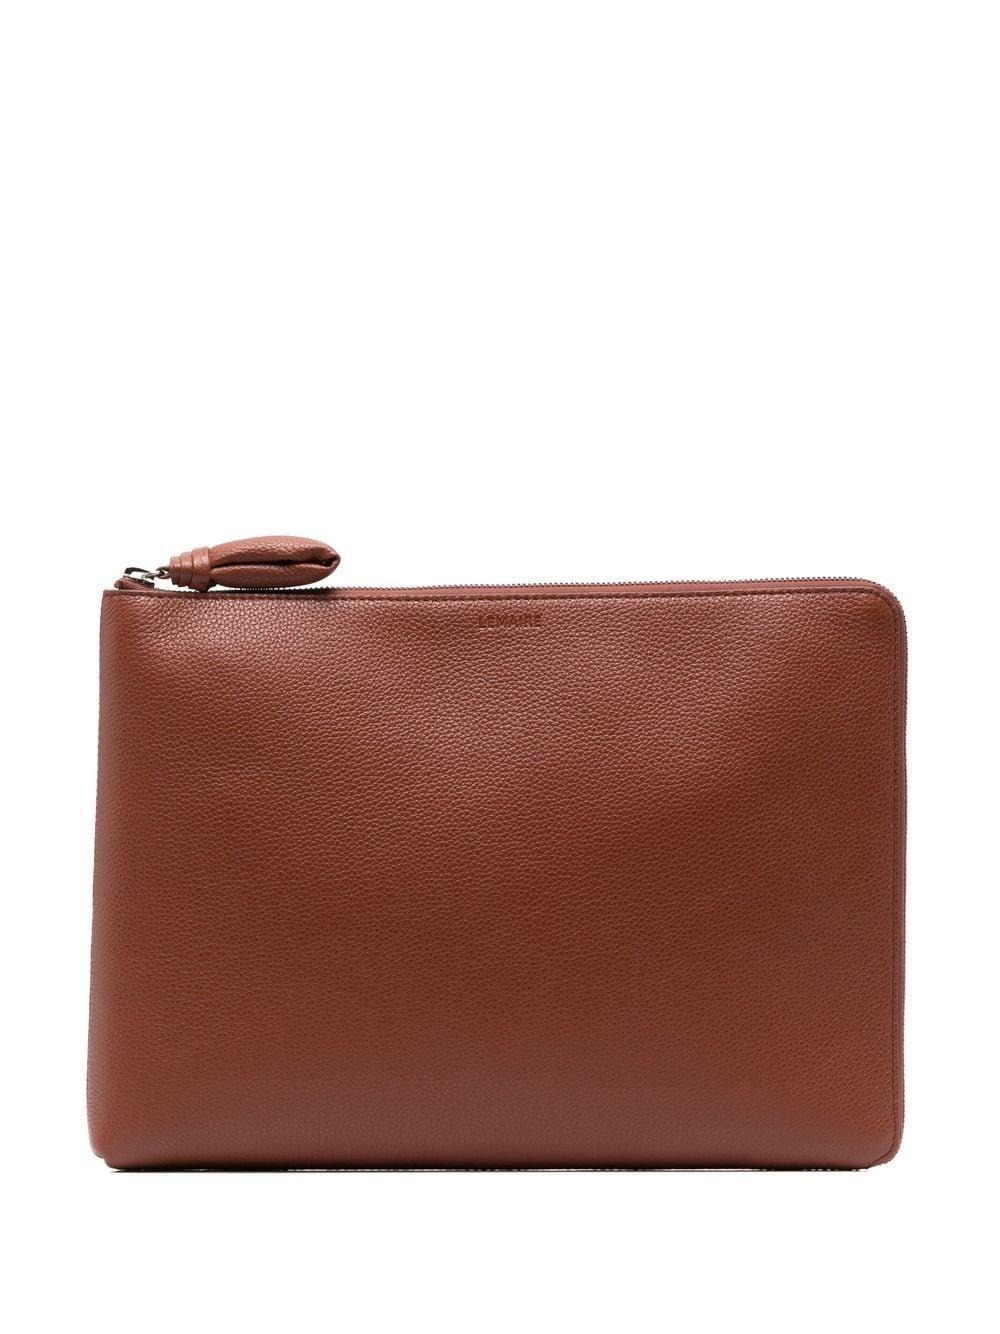 Lemaire Pebbled Leather Clutch Bag in Brown | Lyst Australia